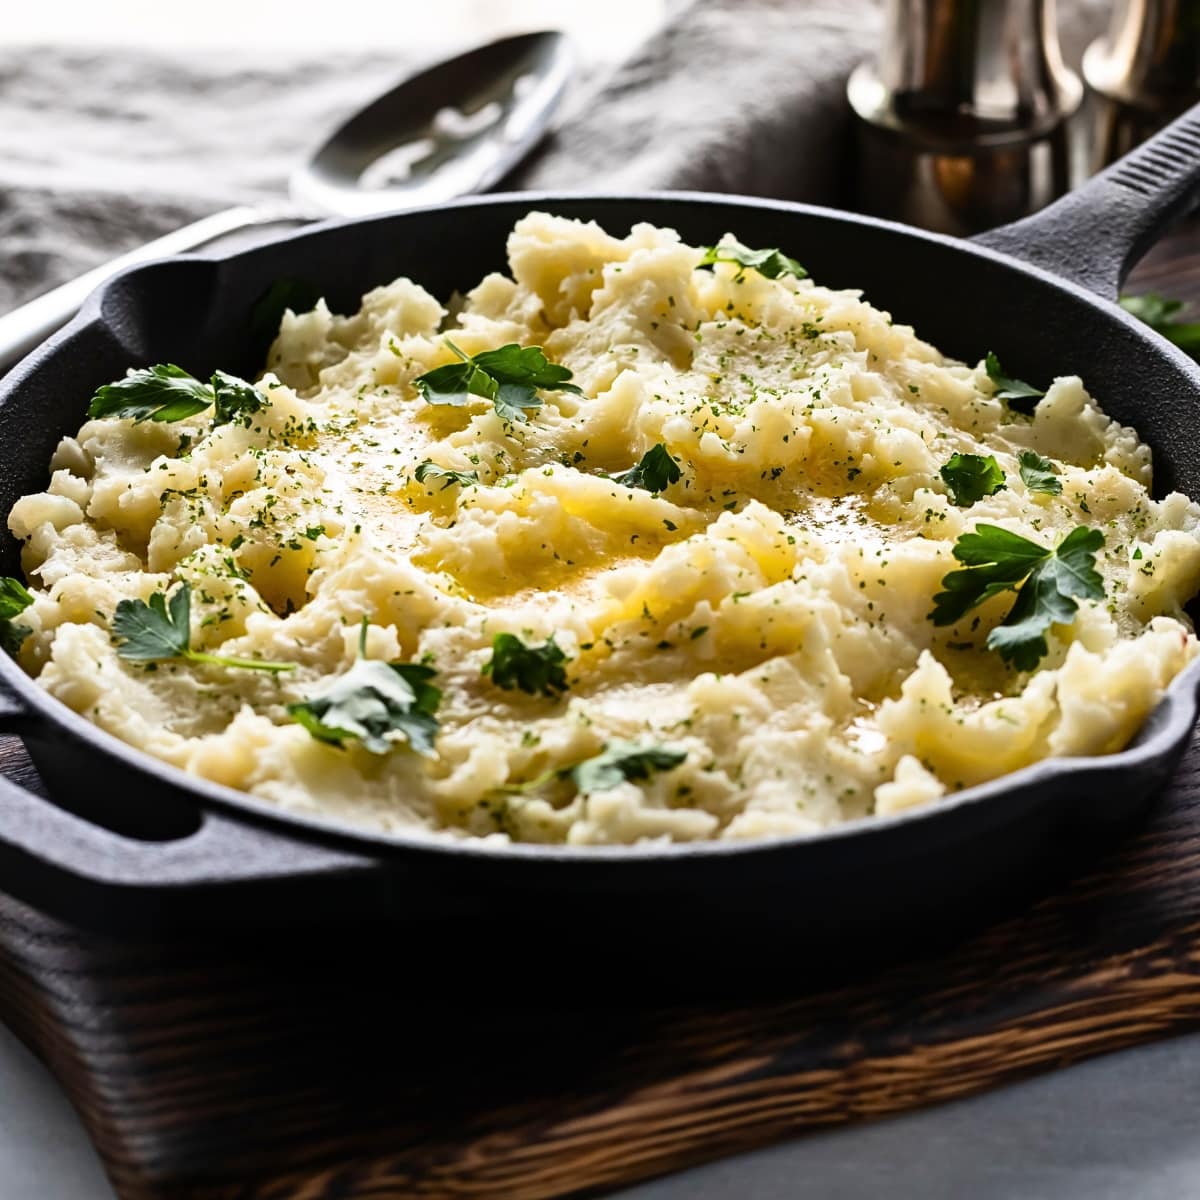 Mashed Potatoes in Skillet with Butter and Herbs